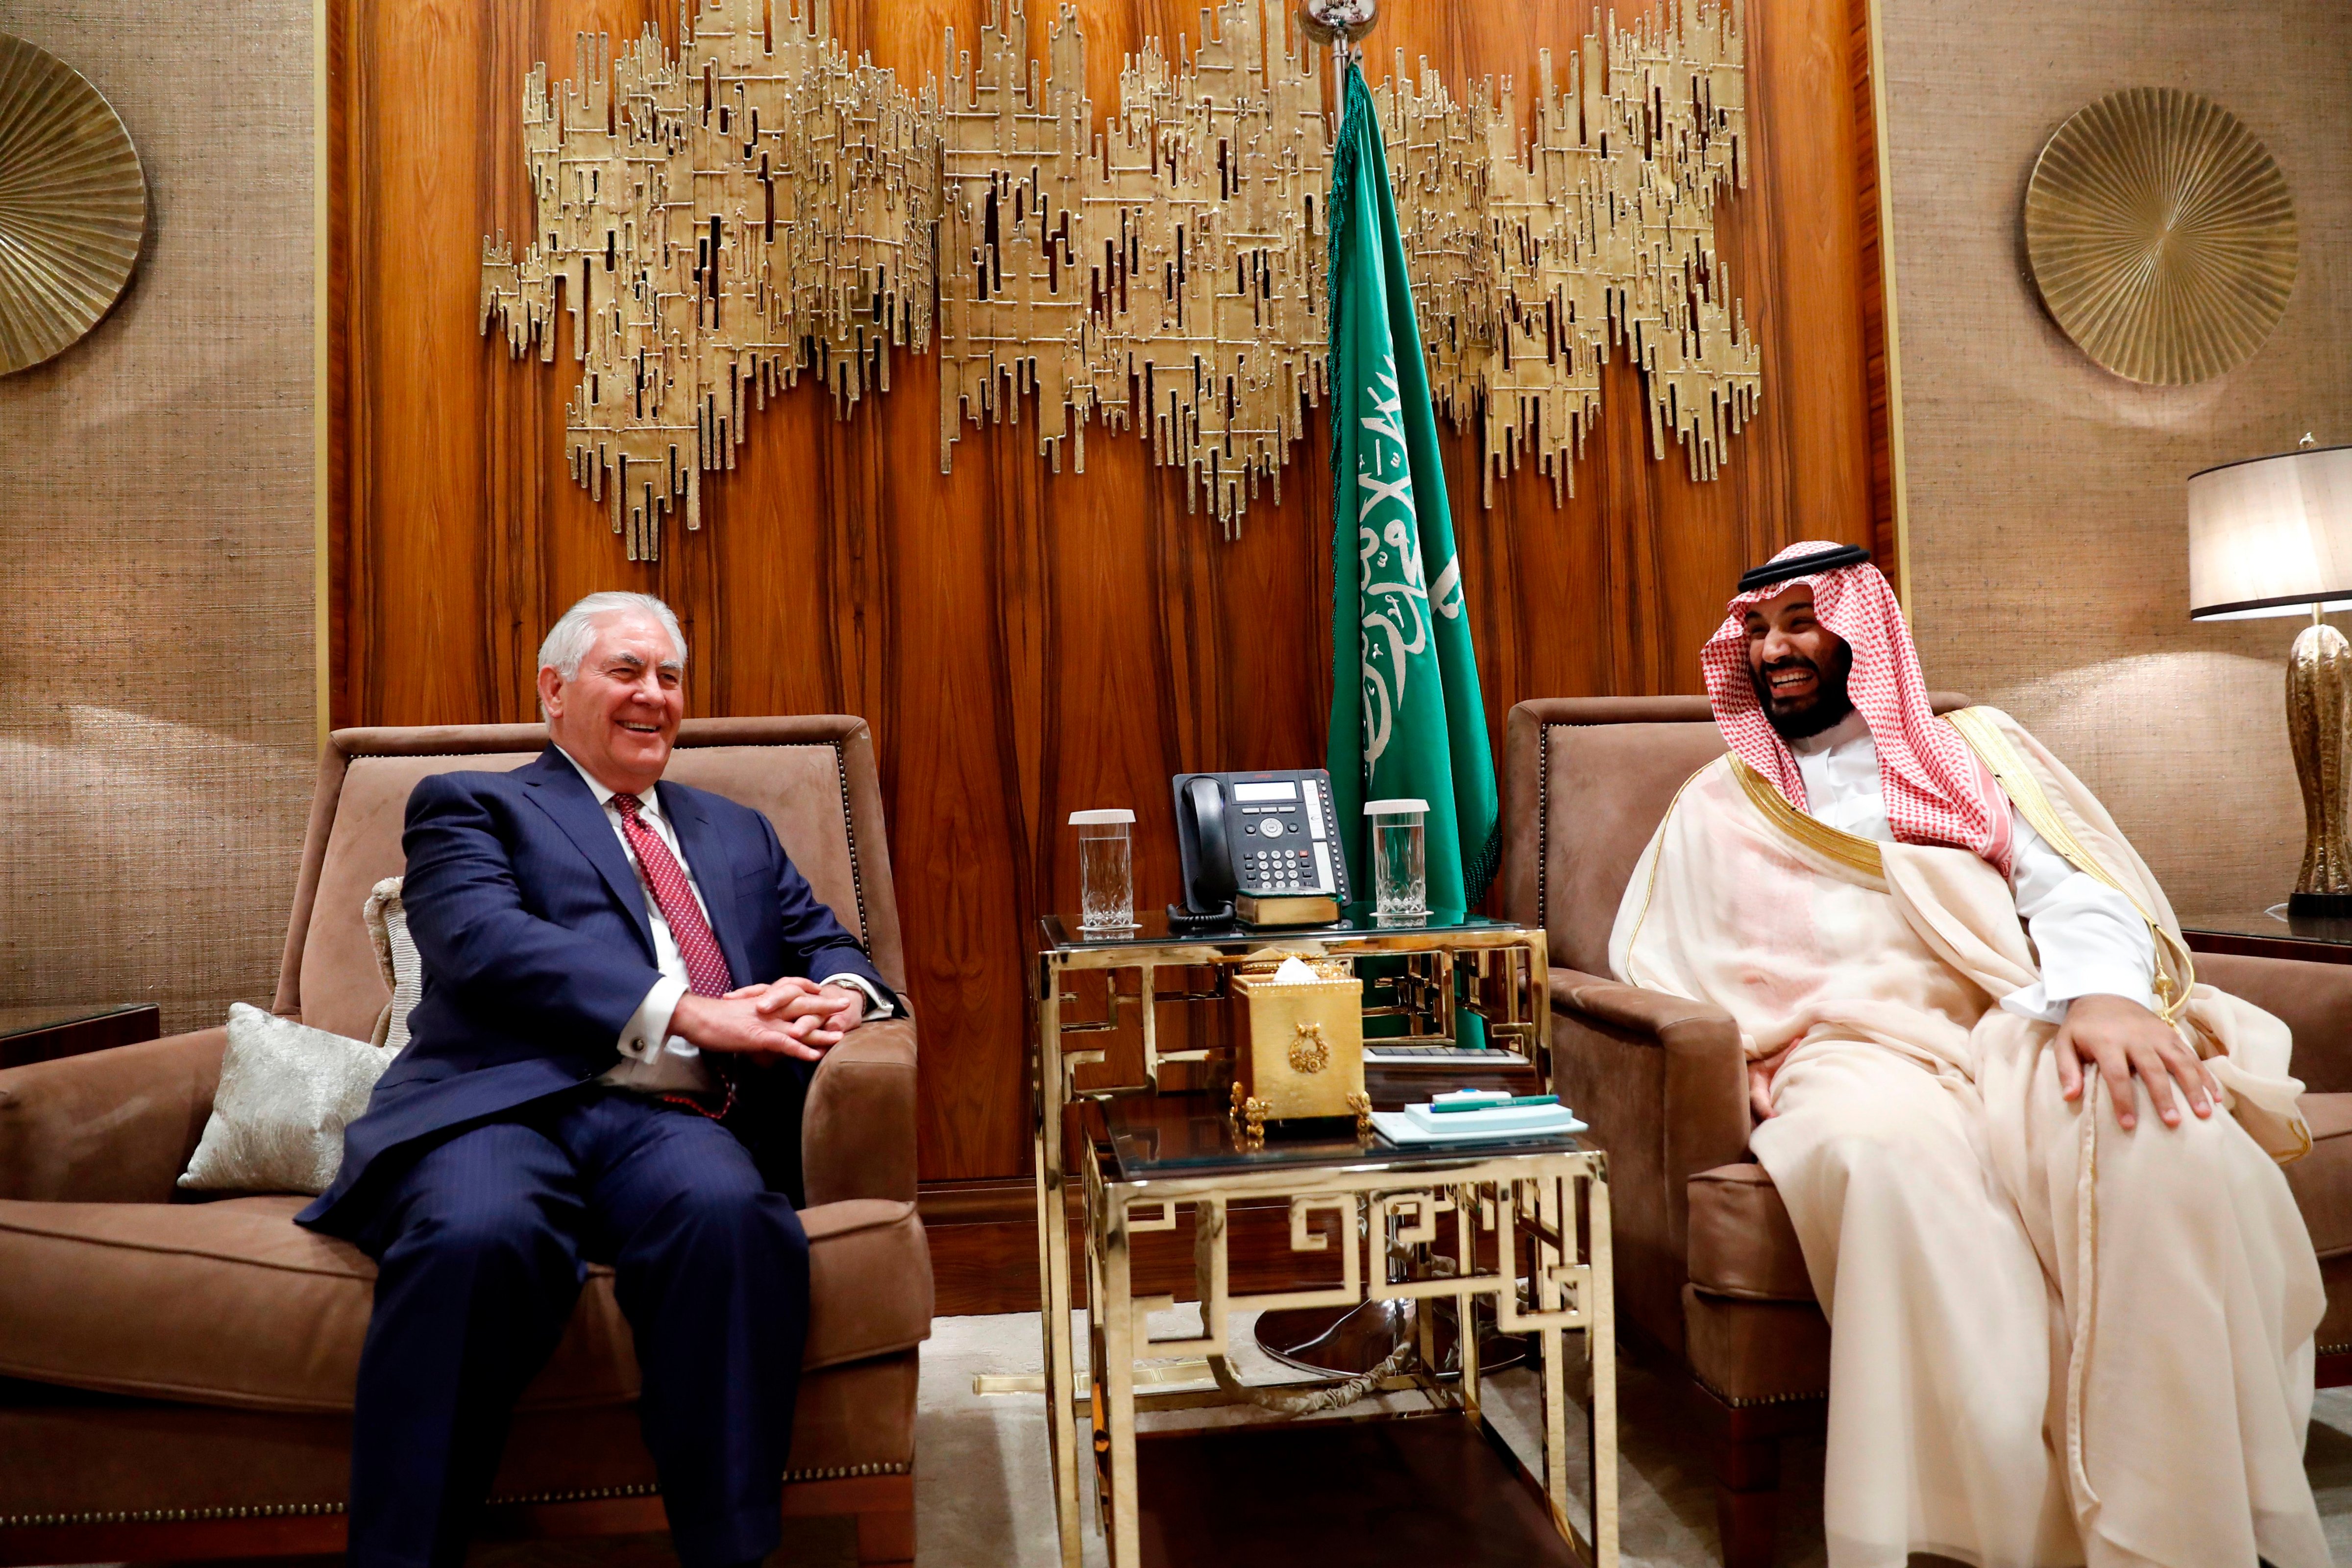 US Secretary of State Rex Tillerson meets with Saudi Crown Prince Mohammed bin Salman in Riyadh on October 22, 2017. (Alex Brandon—AFP/Getty Images)